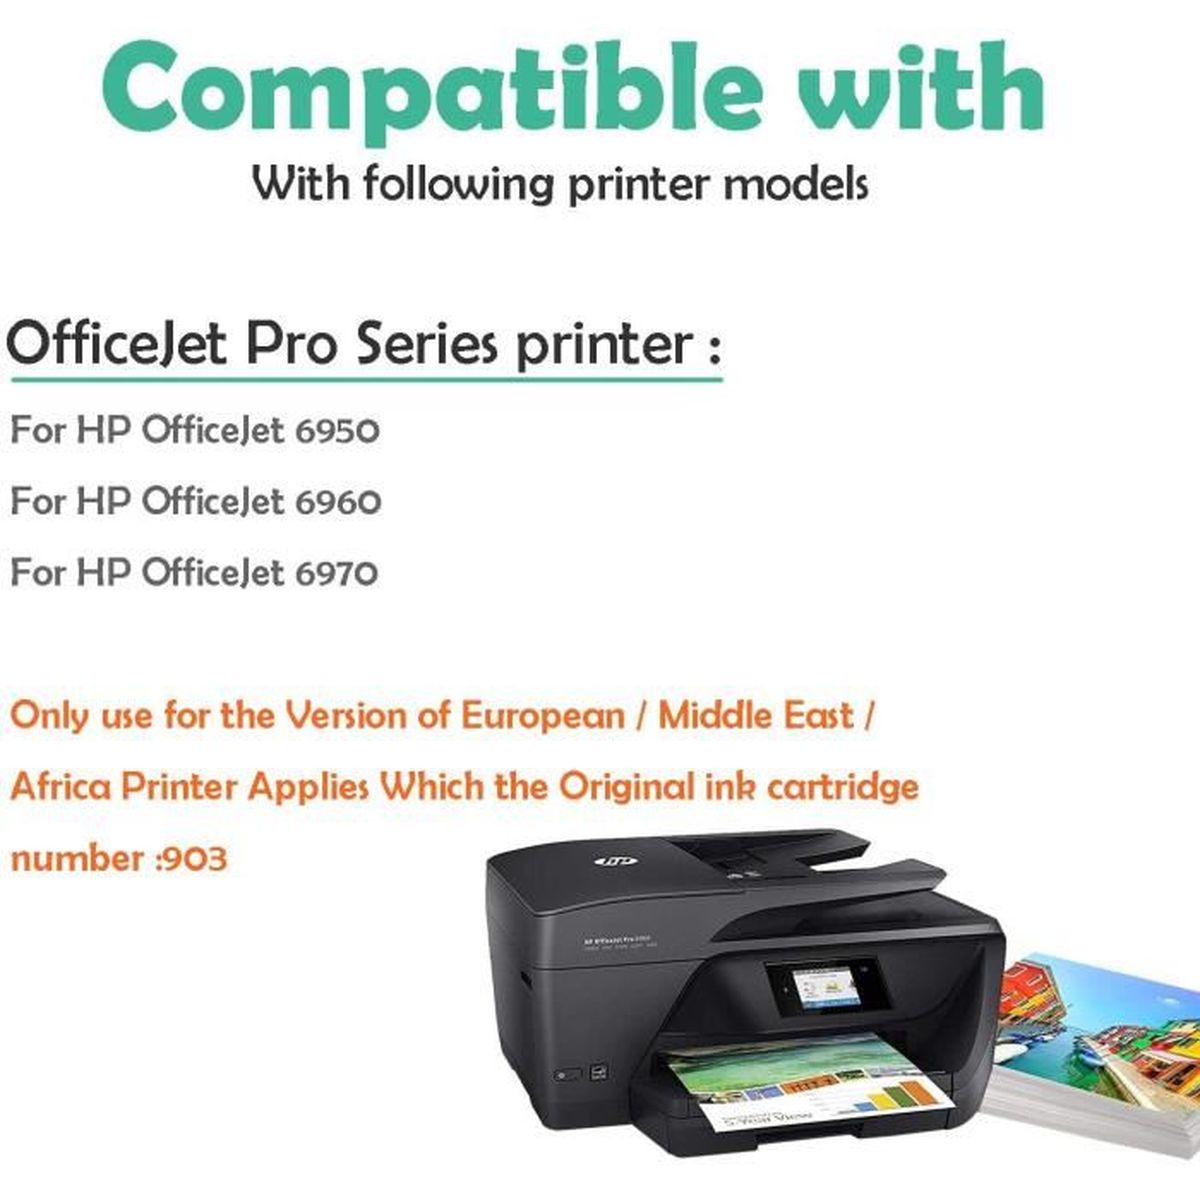 Pack 4 cartouche compatibles HP 903 xl bcmy w.ilm - OWA